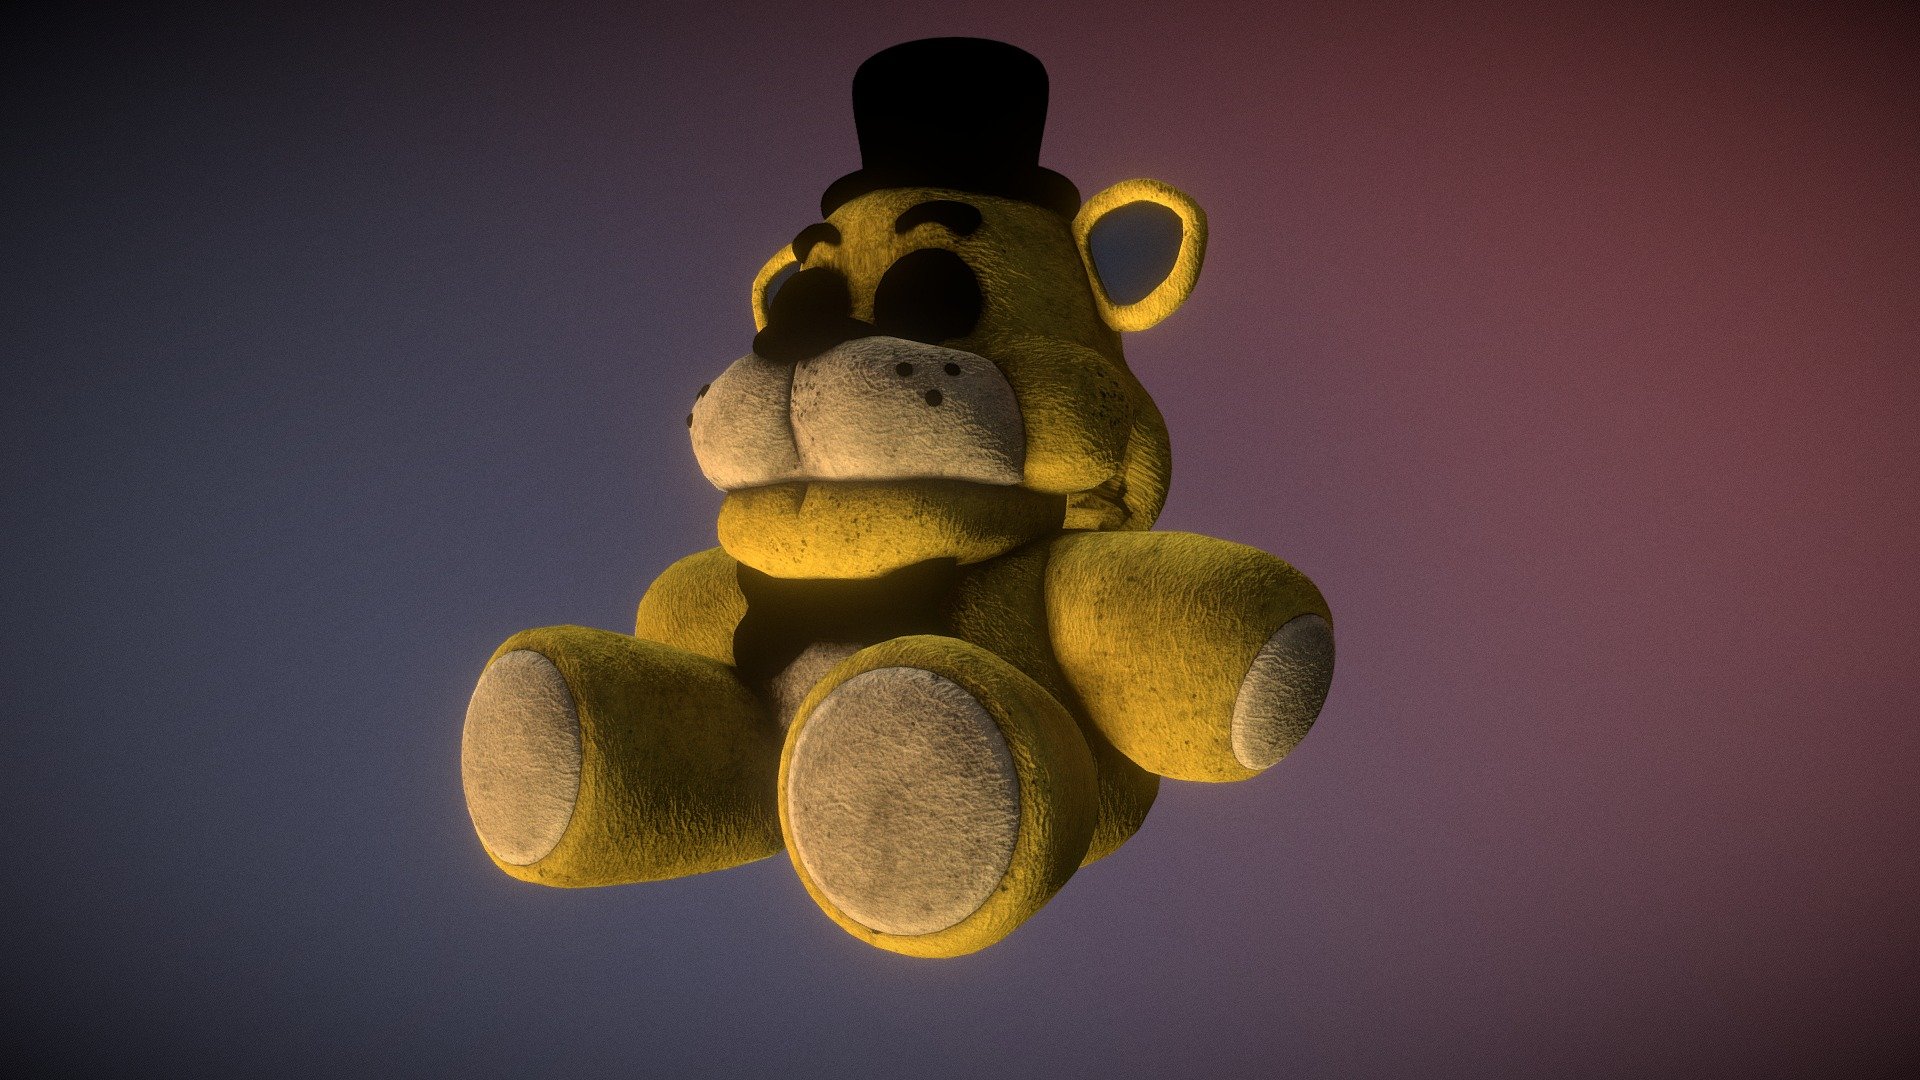 Golden Freddy Plush Toy: All You Need To Know